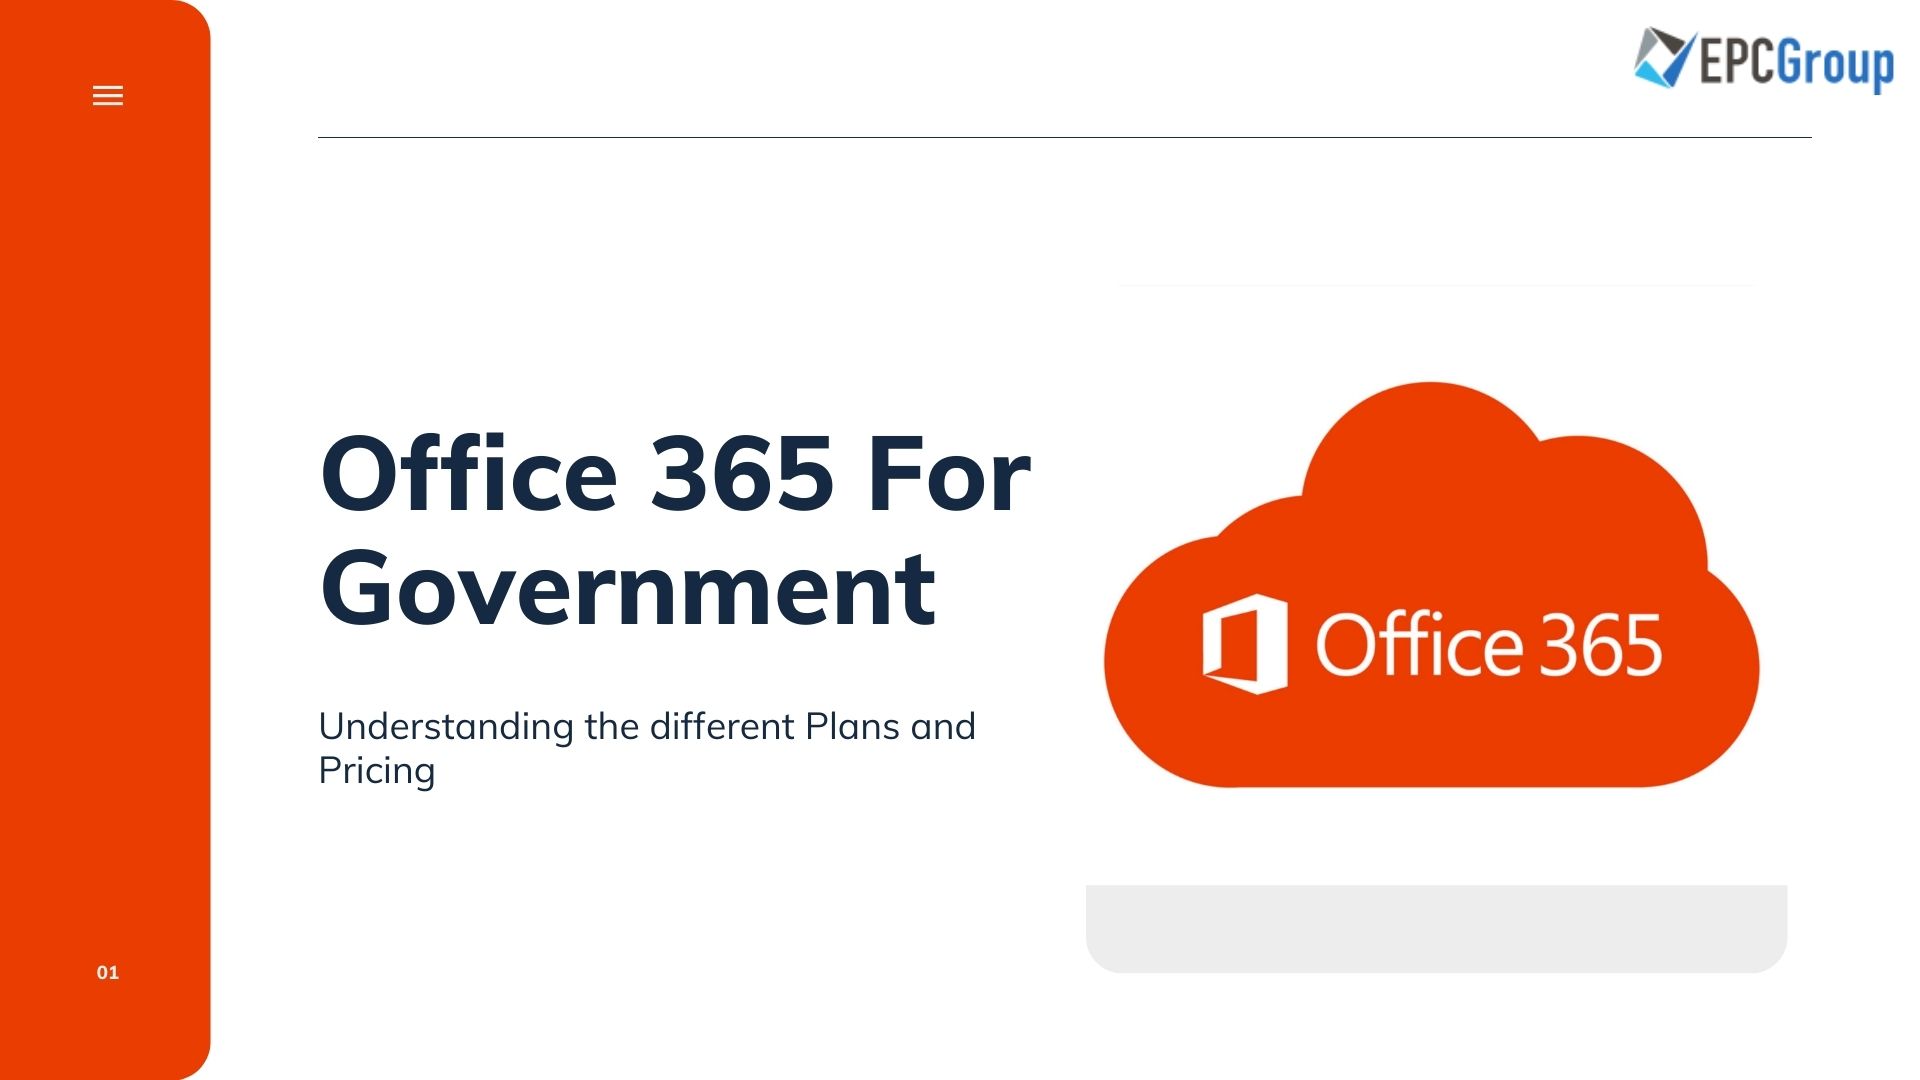 What is Office 365 For Government Plans and Pricing